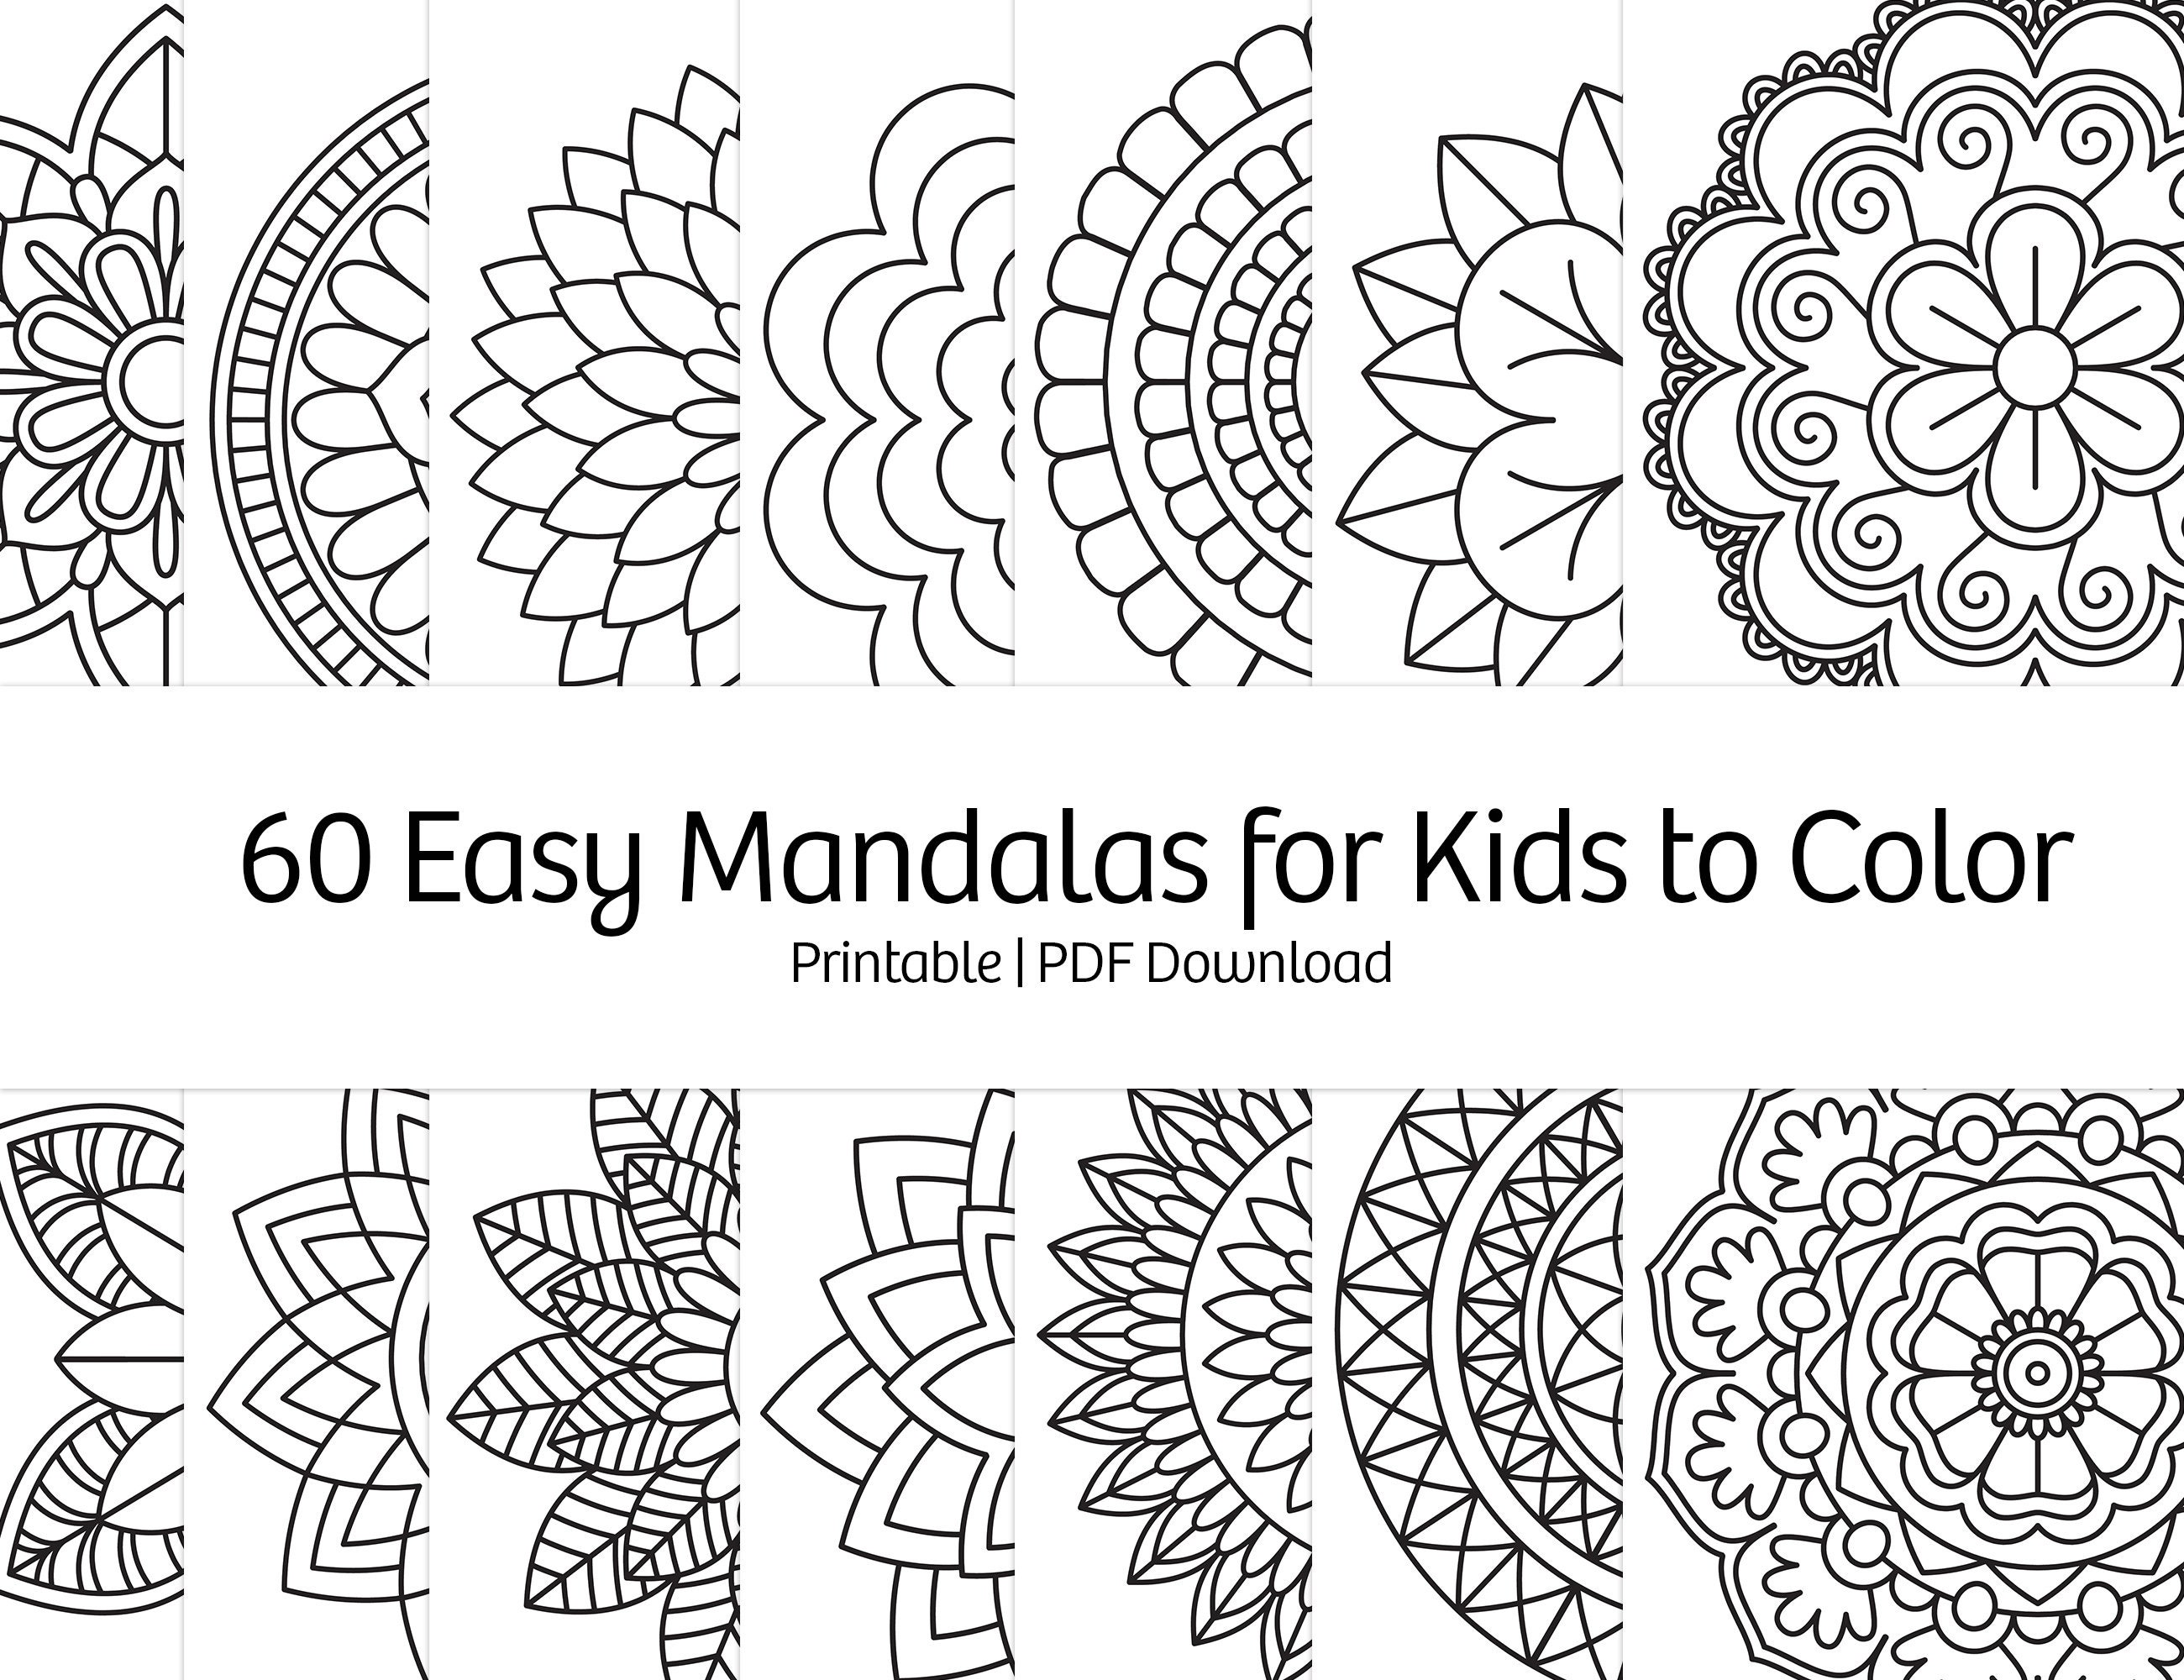 mandala coloring book for kids ages 48 years, simple mandala ,coloring book  page, simple outlines, , vector illustration line art 26174769 Vector Art  at Vecteezy